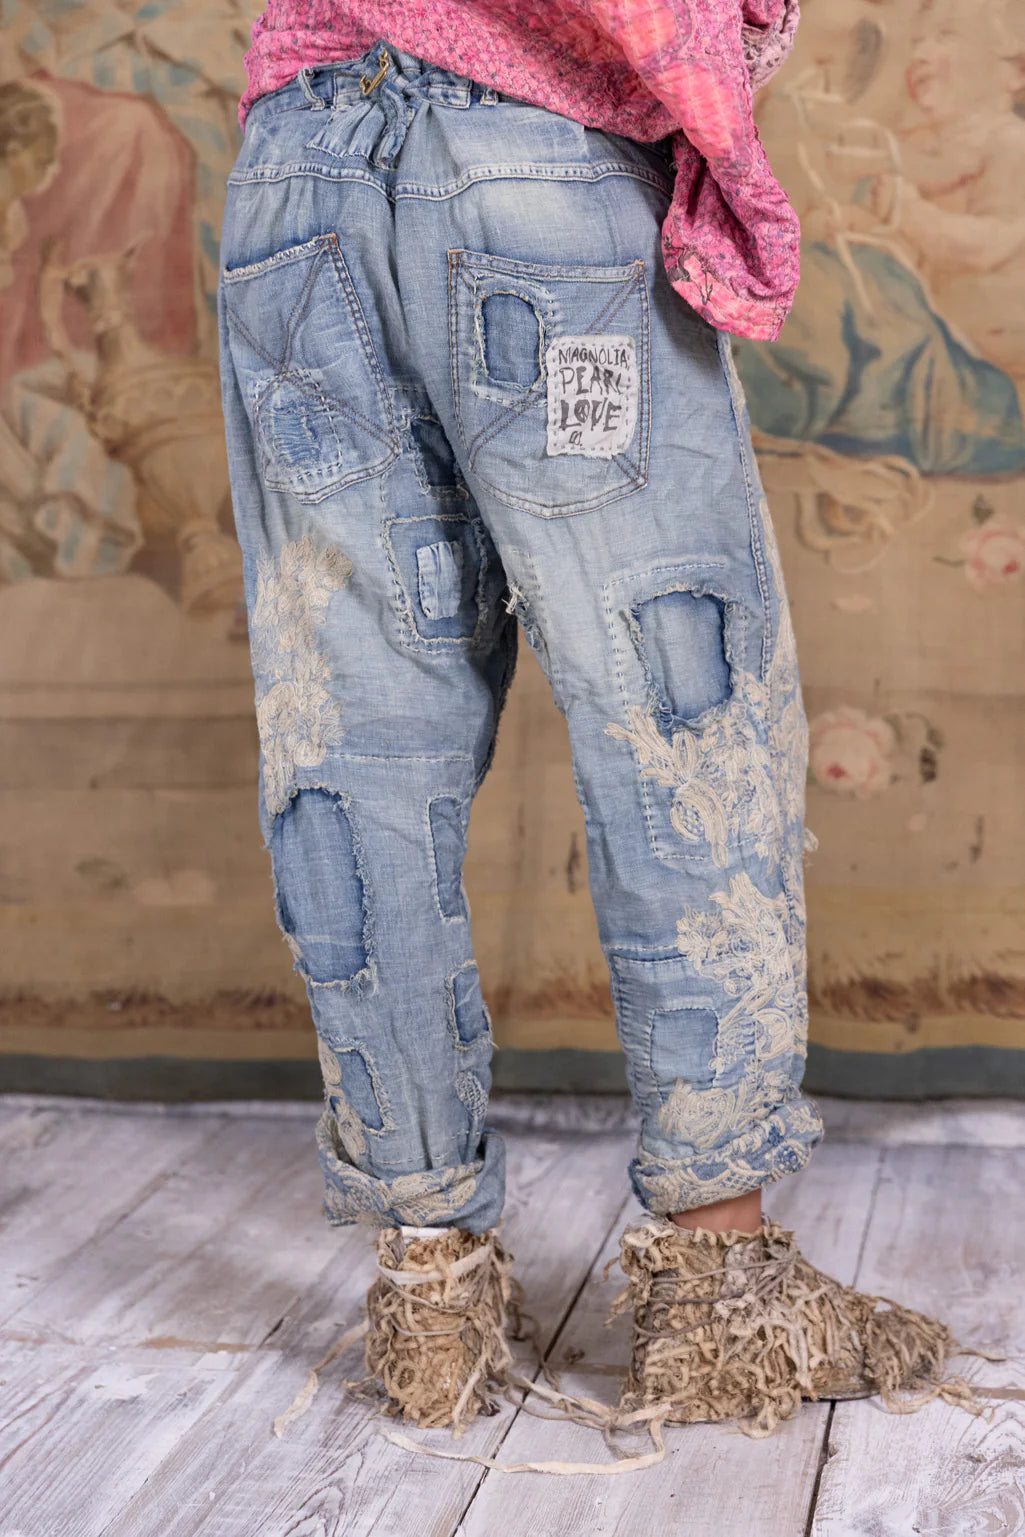 Lace Embroidered Miner Denims 520 - Magnolia Pearl